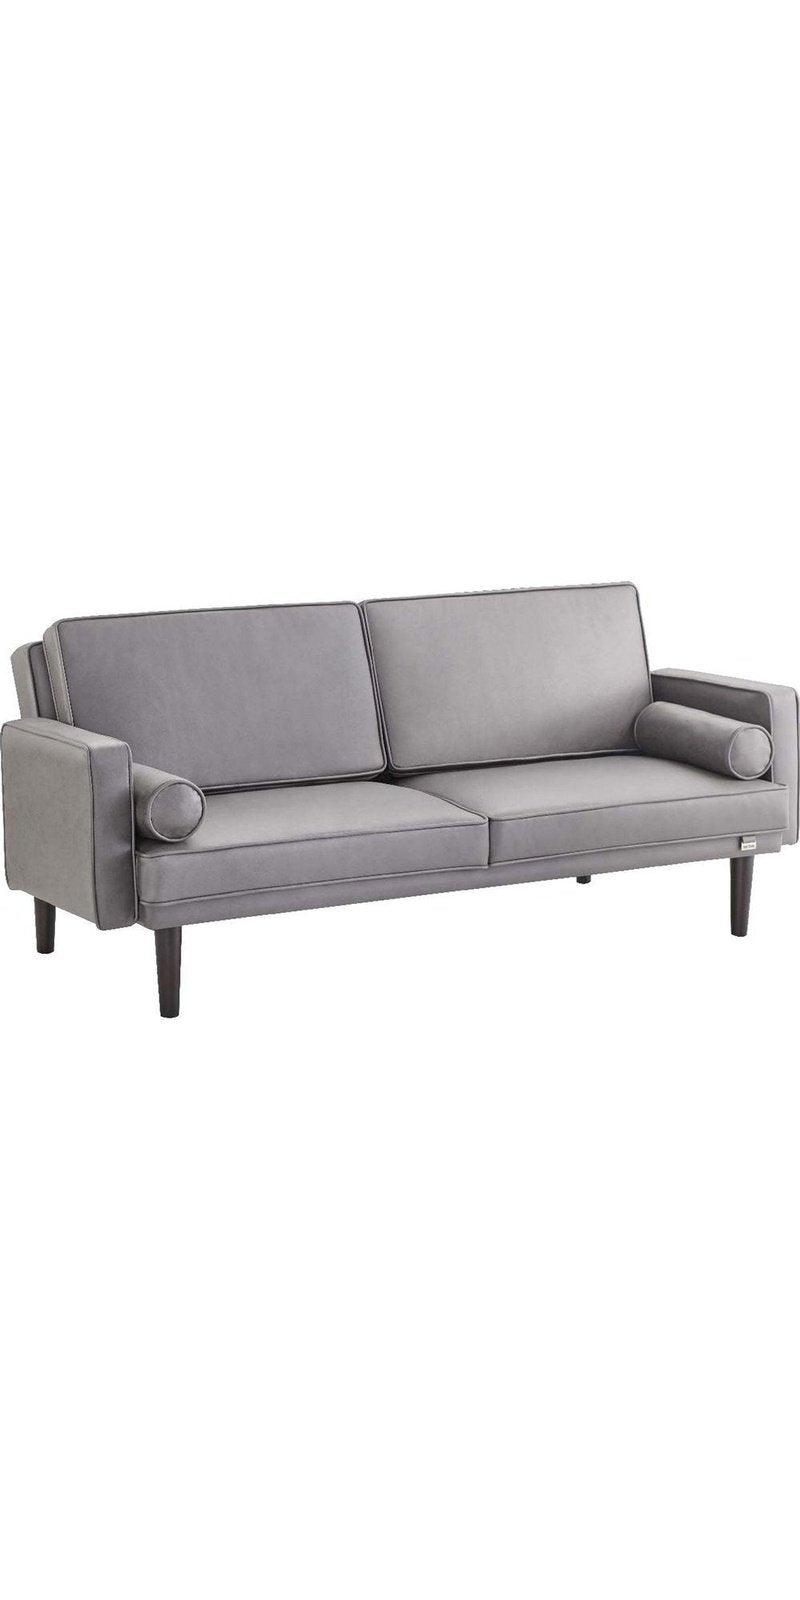 HAVEN SLEEPER COUCH GREY